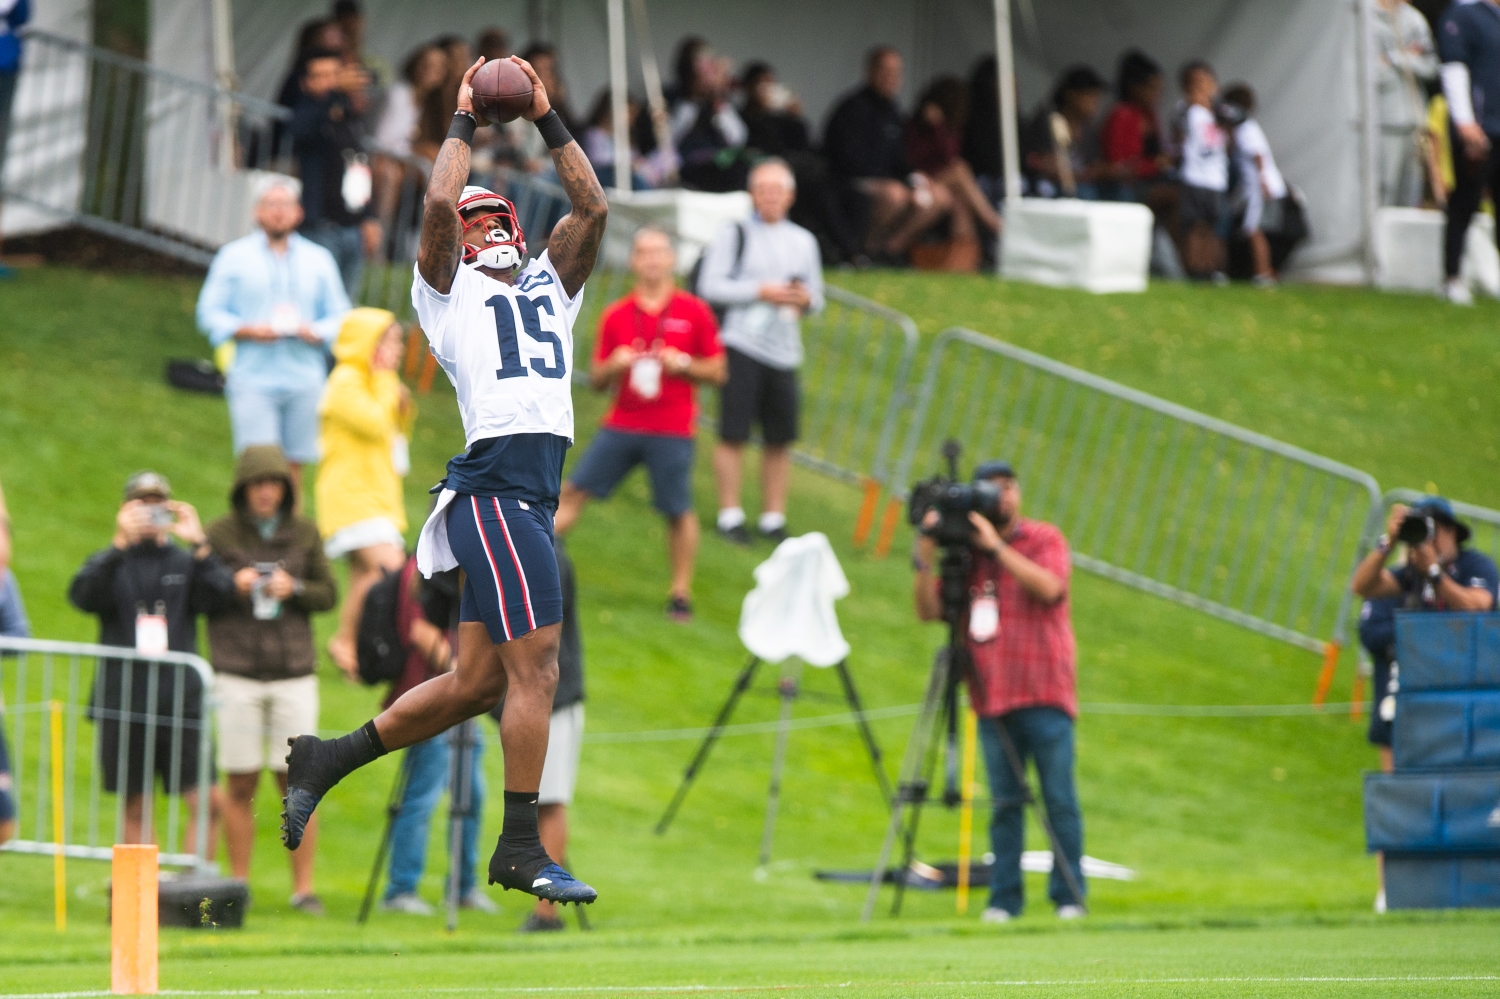 New England Patriots wide receiver N'Keal Harry makes a leaping catch in practice.